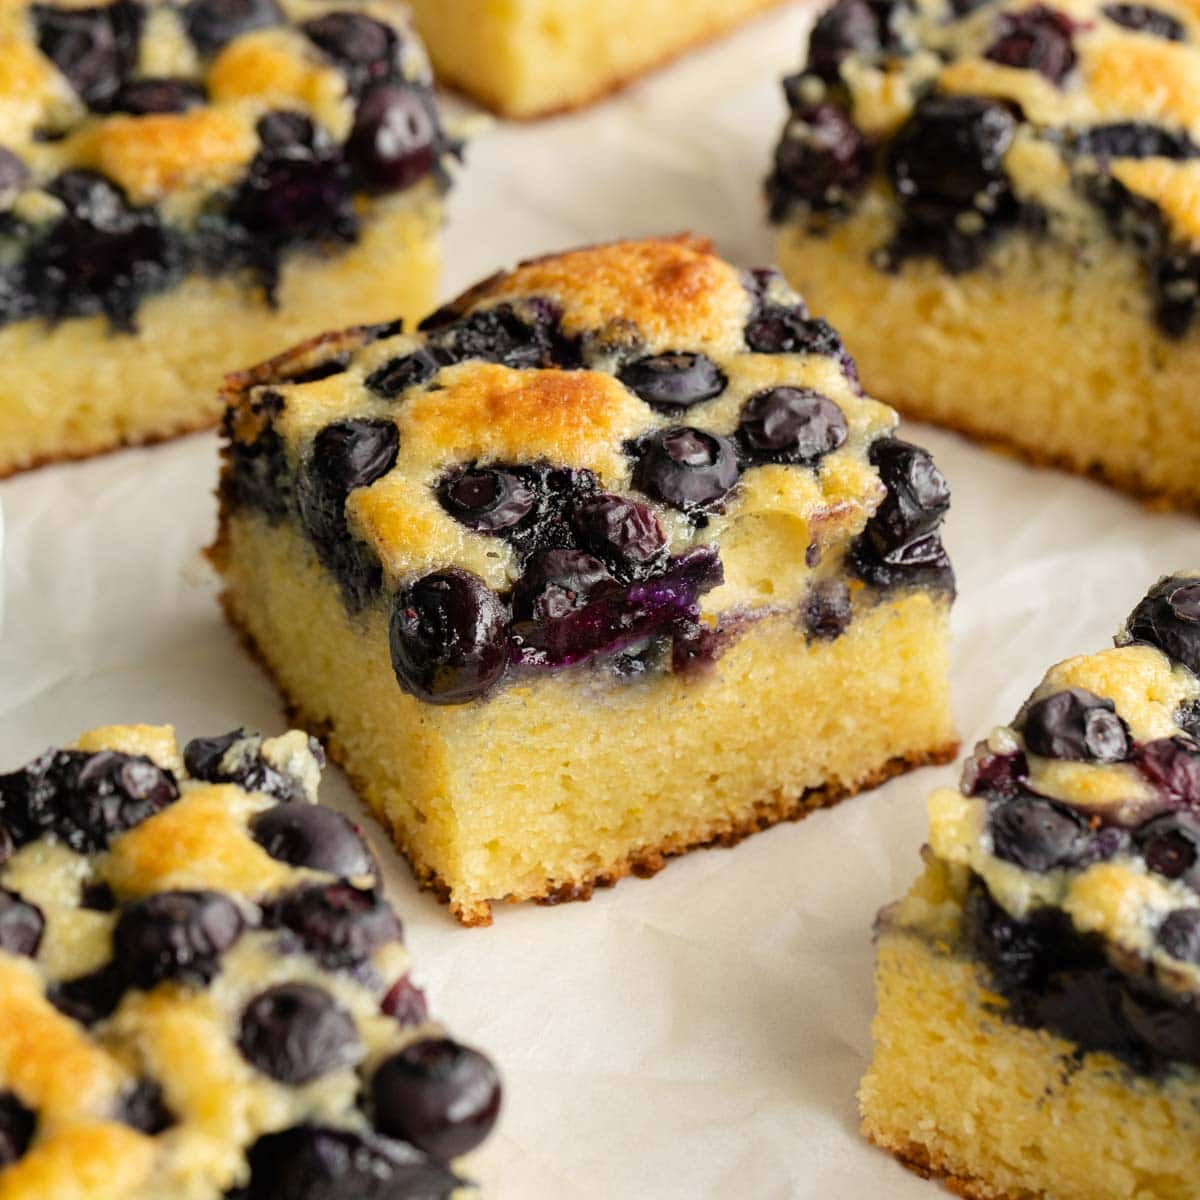 Blueberry cake cut into squares and arranged on parchment paper.